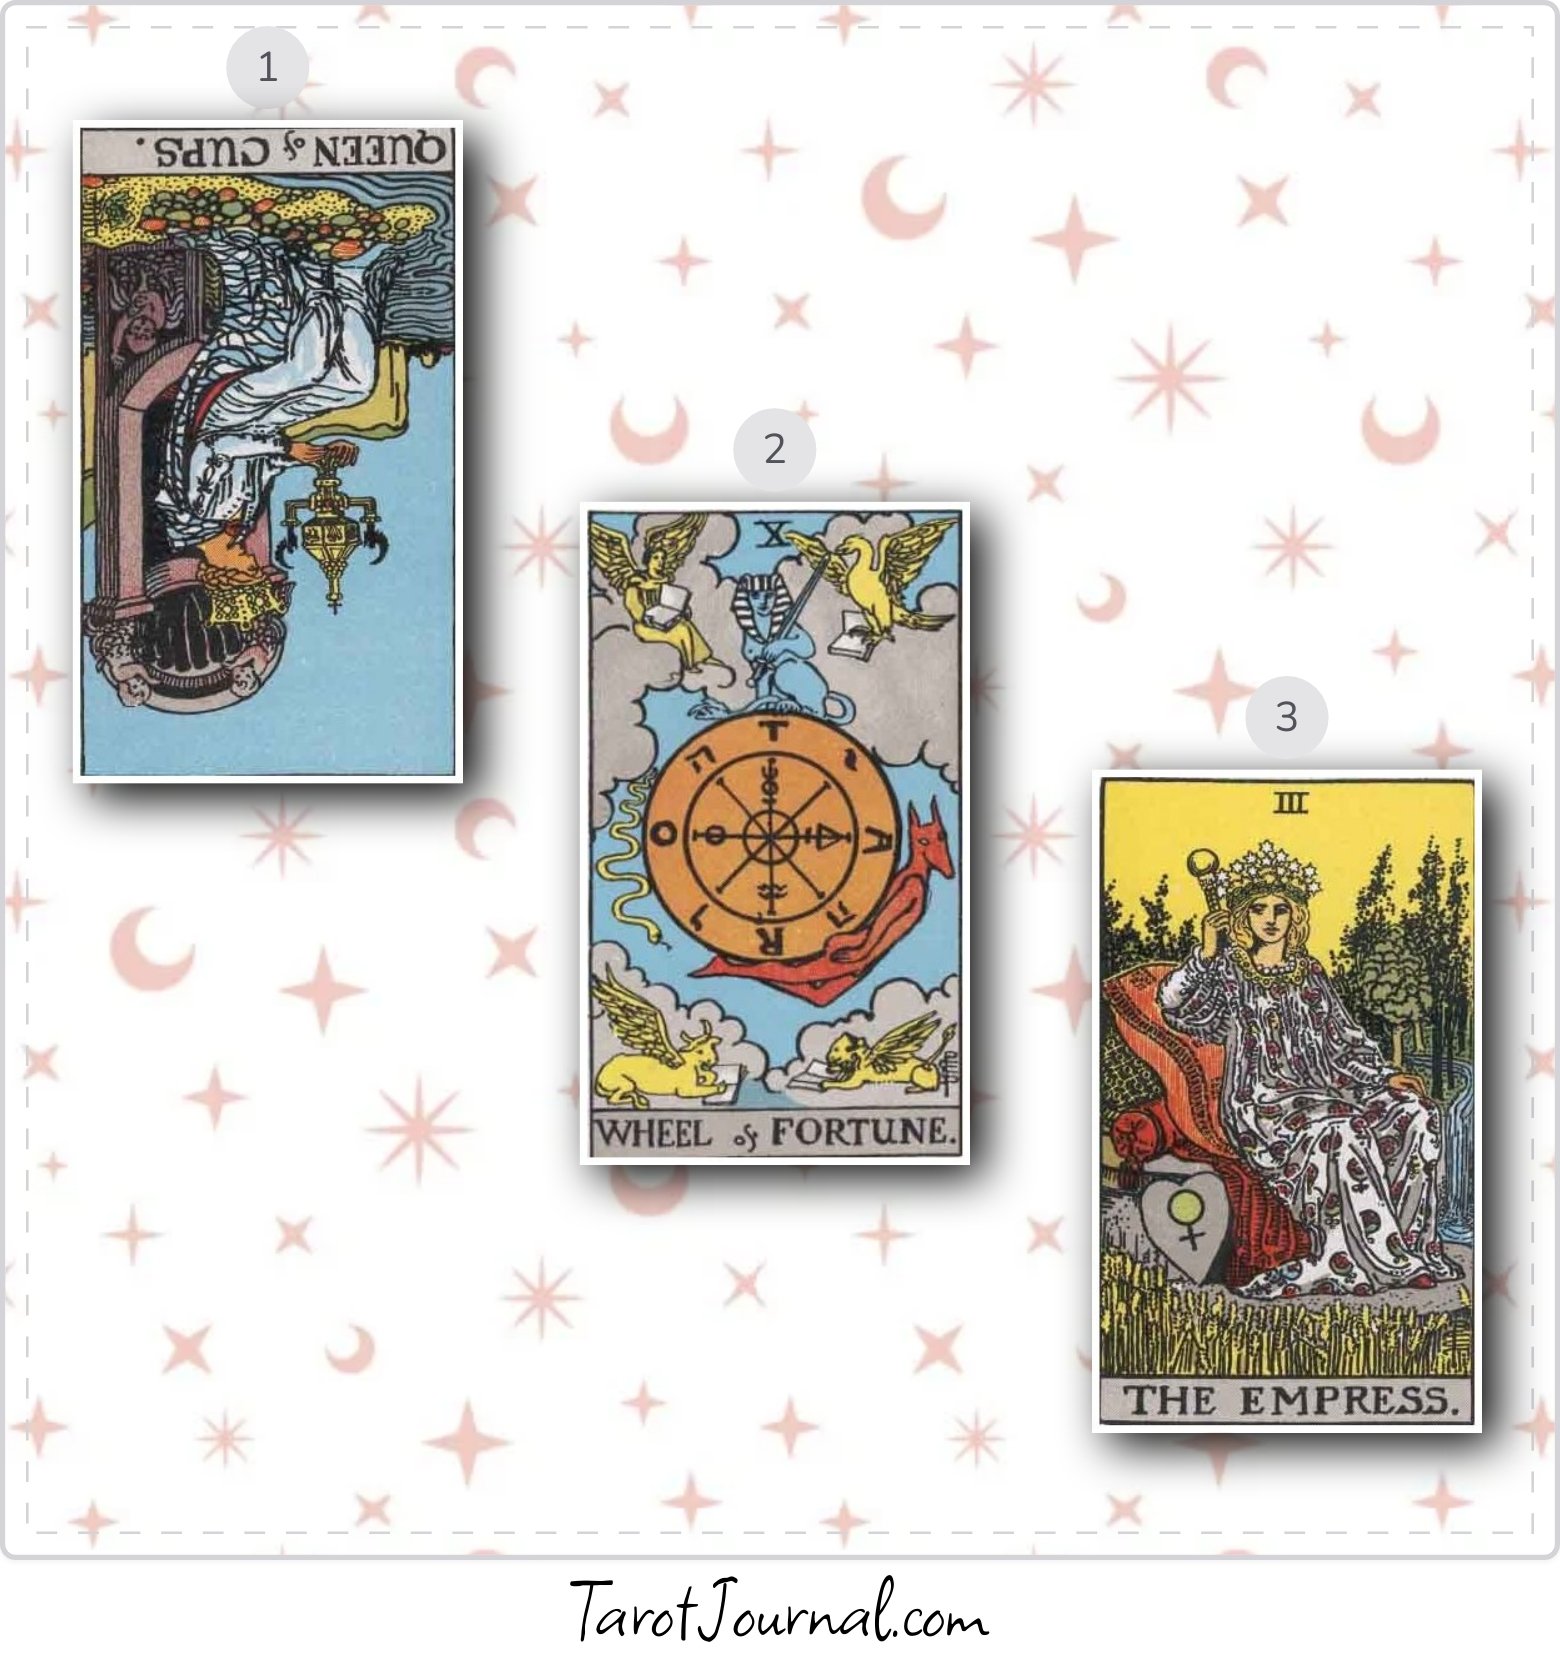 What do I need to be aware of in my past relationships in order to better future ones? - tarot reading by Tammy